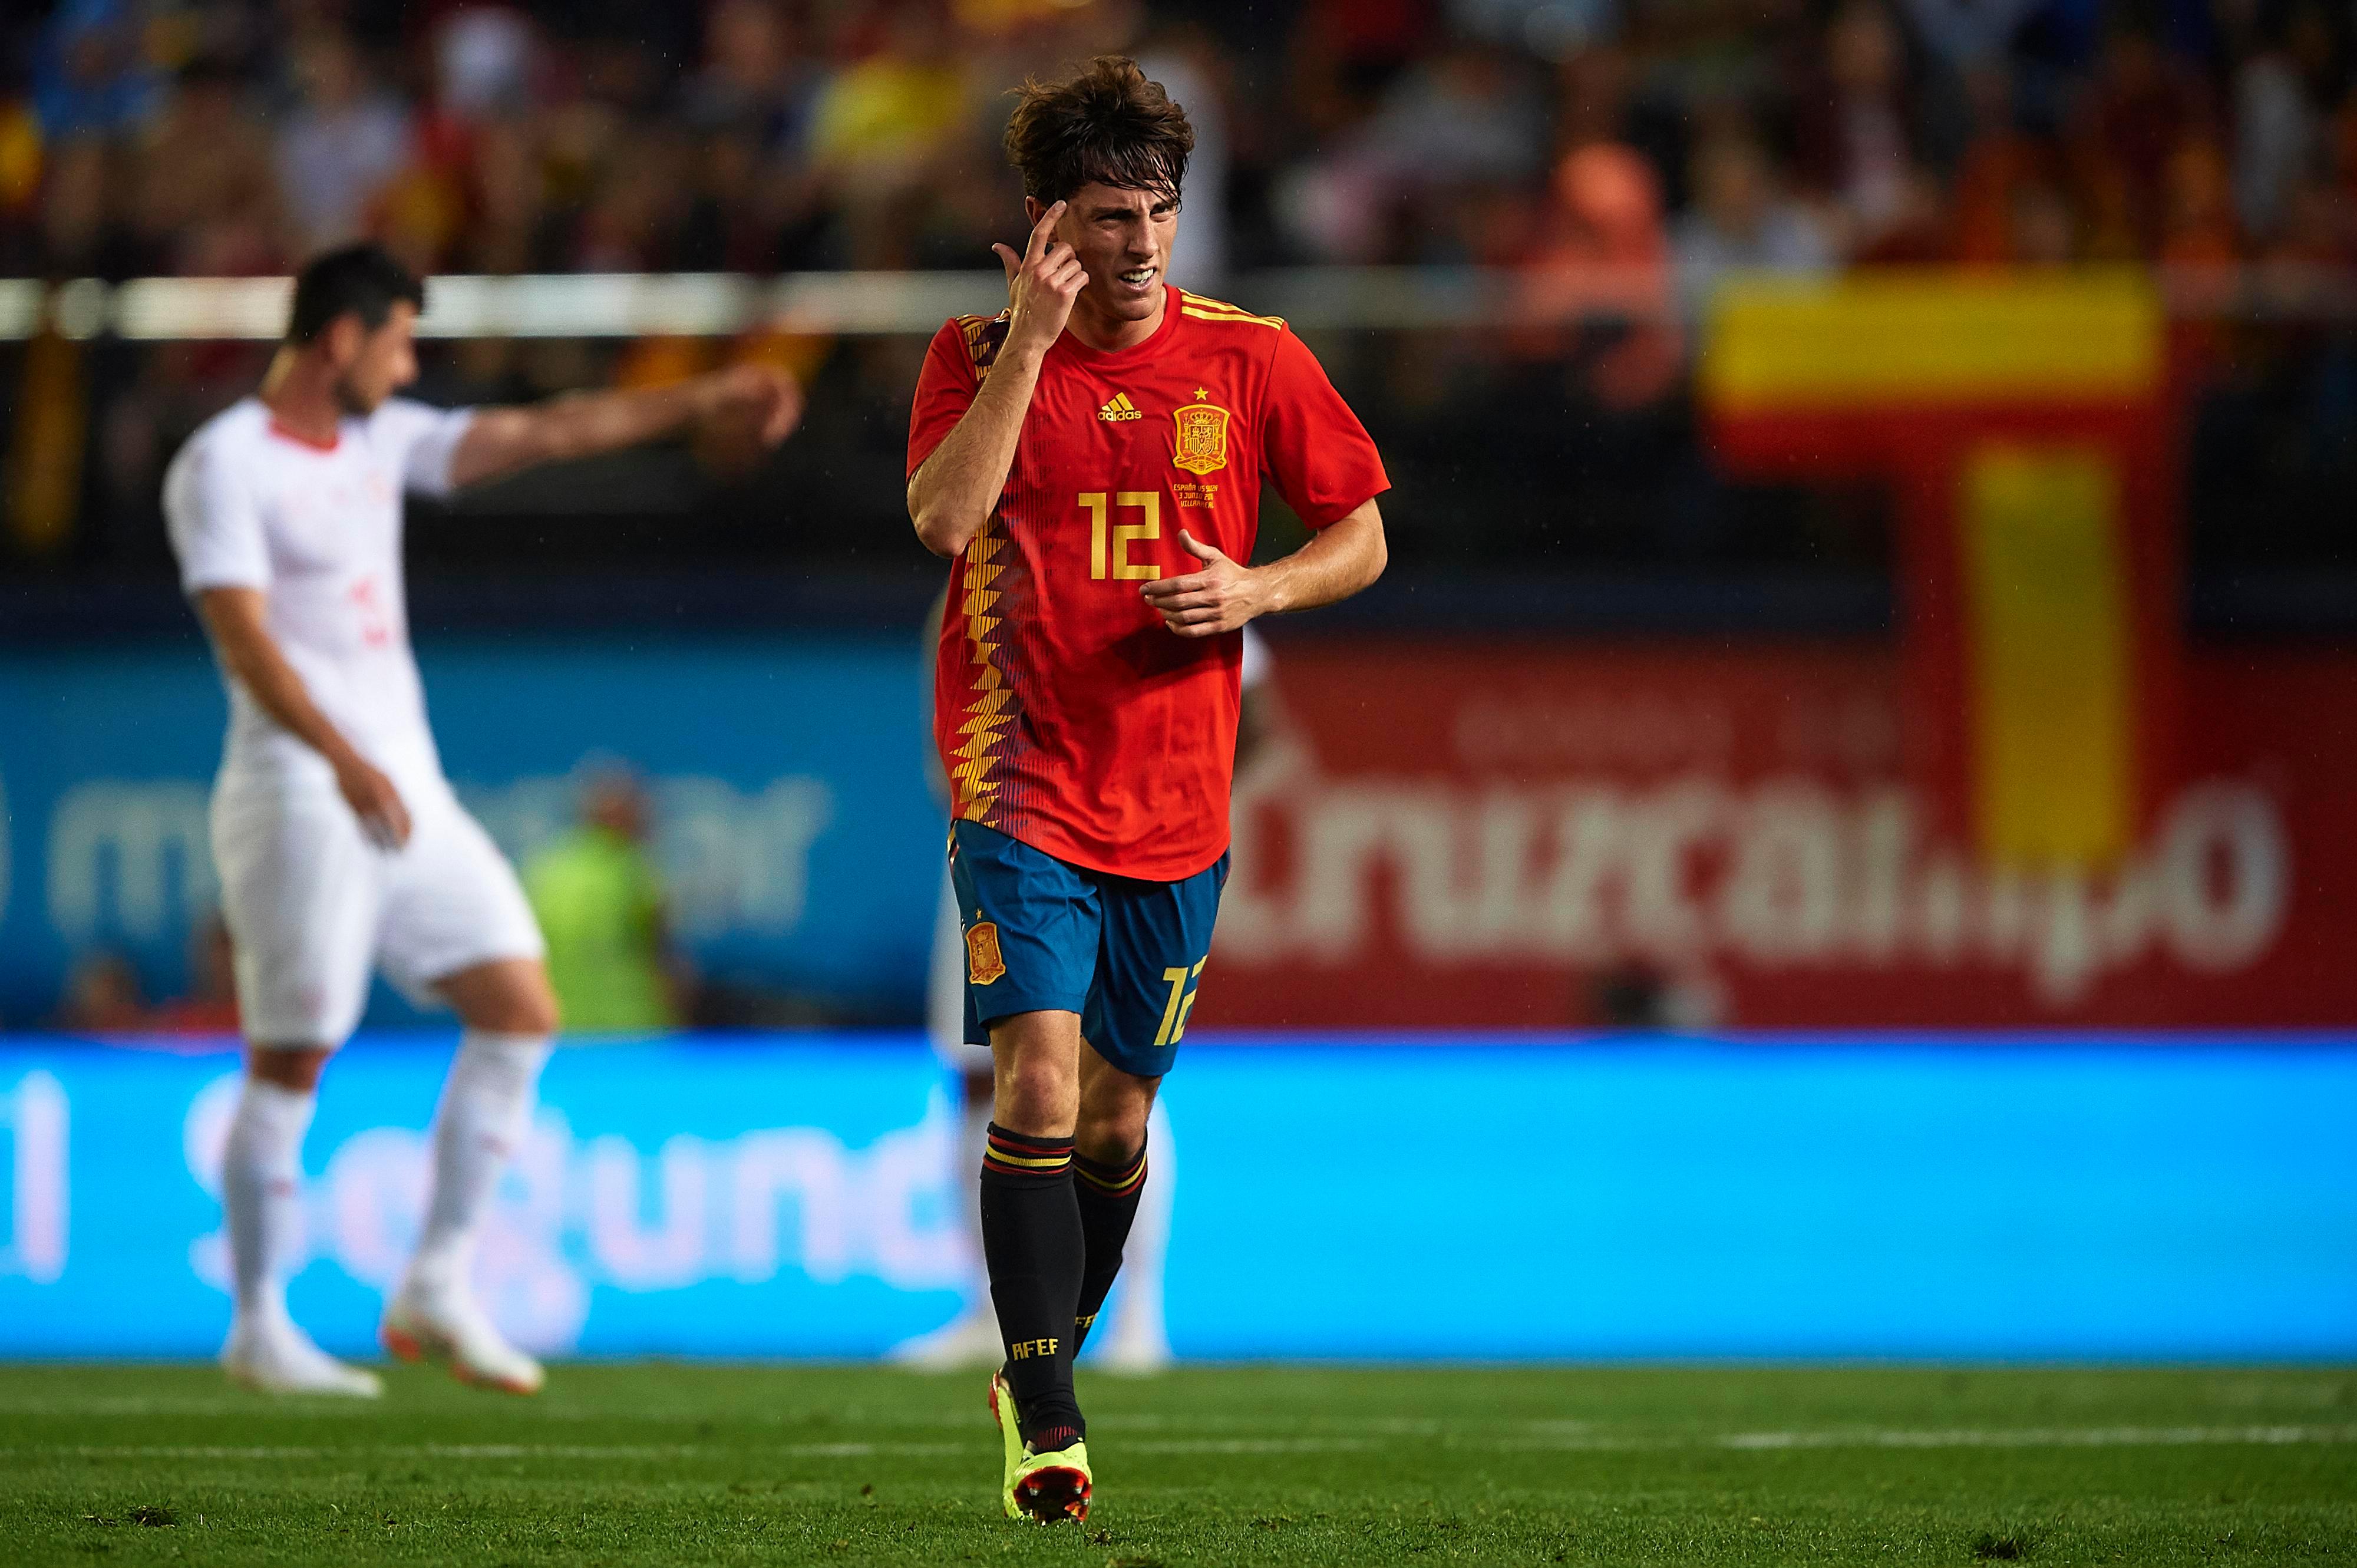 Real Madrid sign another top young star as £35m deal for Spain international Alvaro Odriozola confirmed